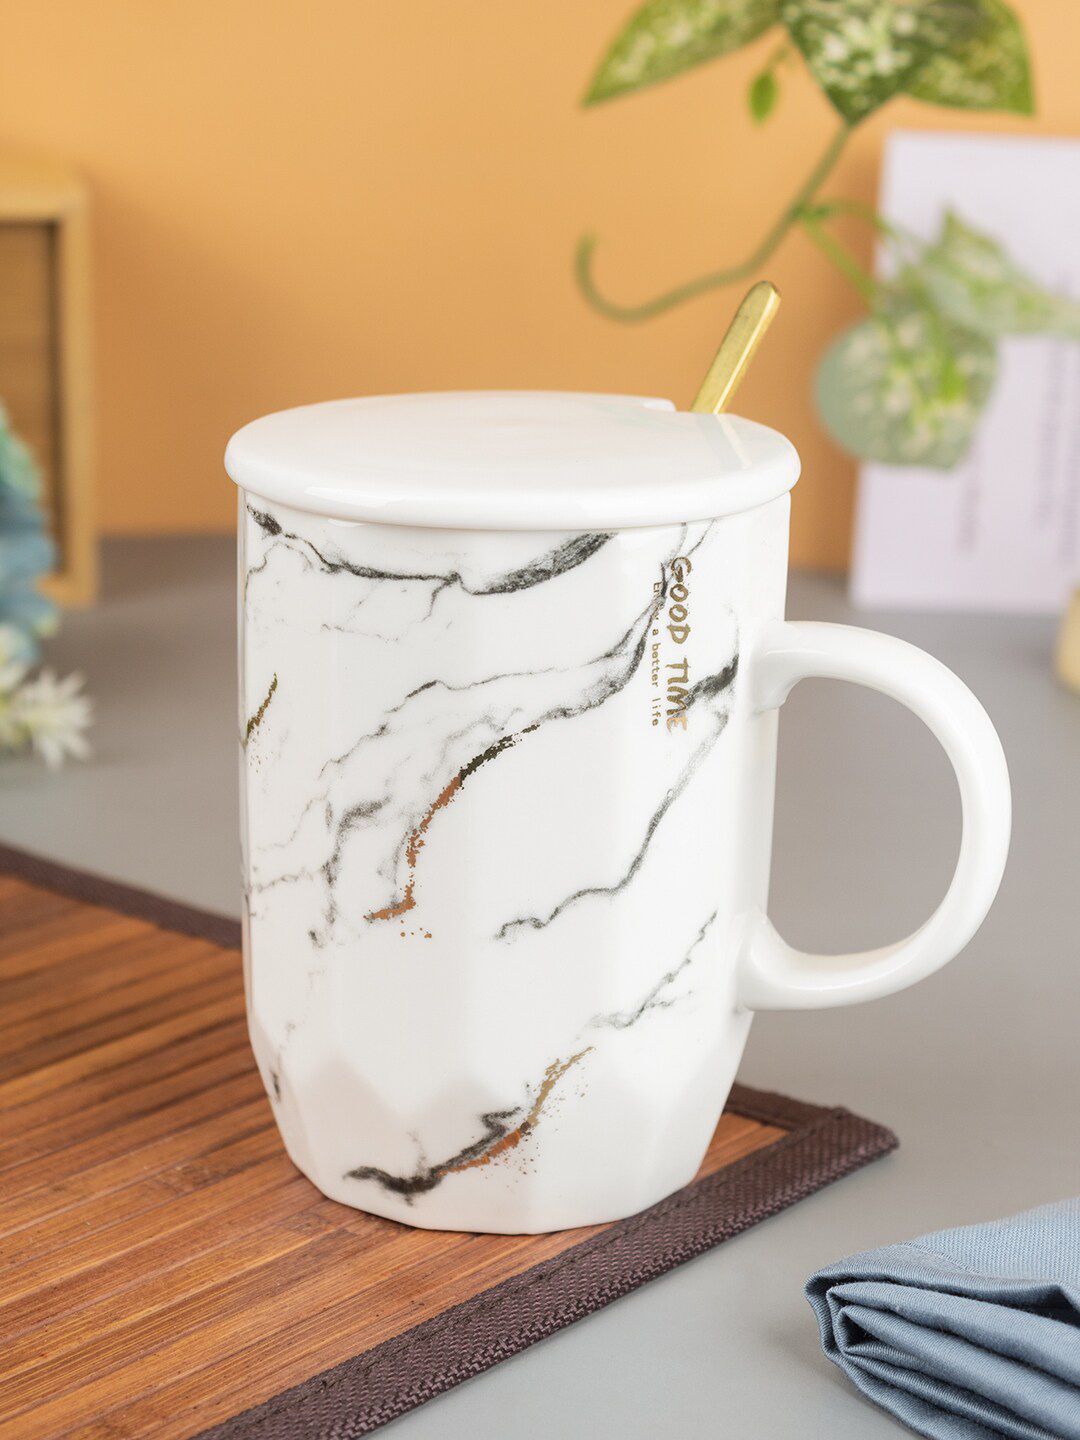 MARKET99 White Printed Ceramic Glossy Mug With Lid & Spoon Price in India